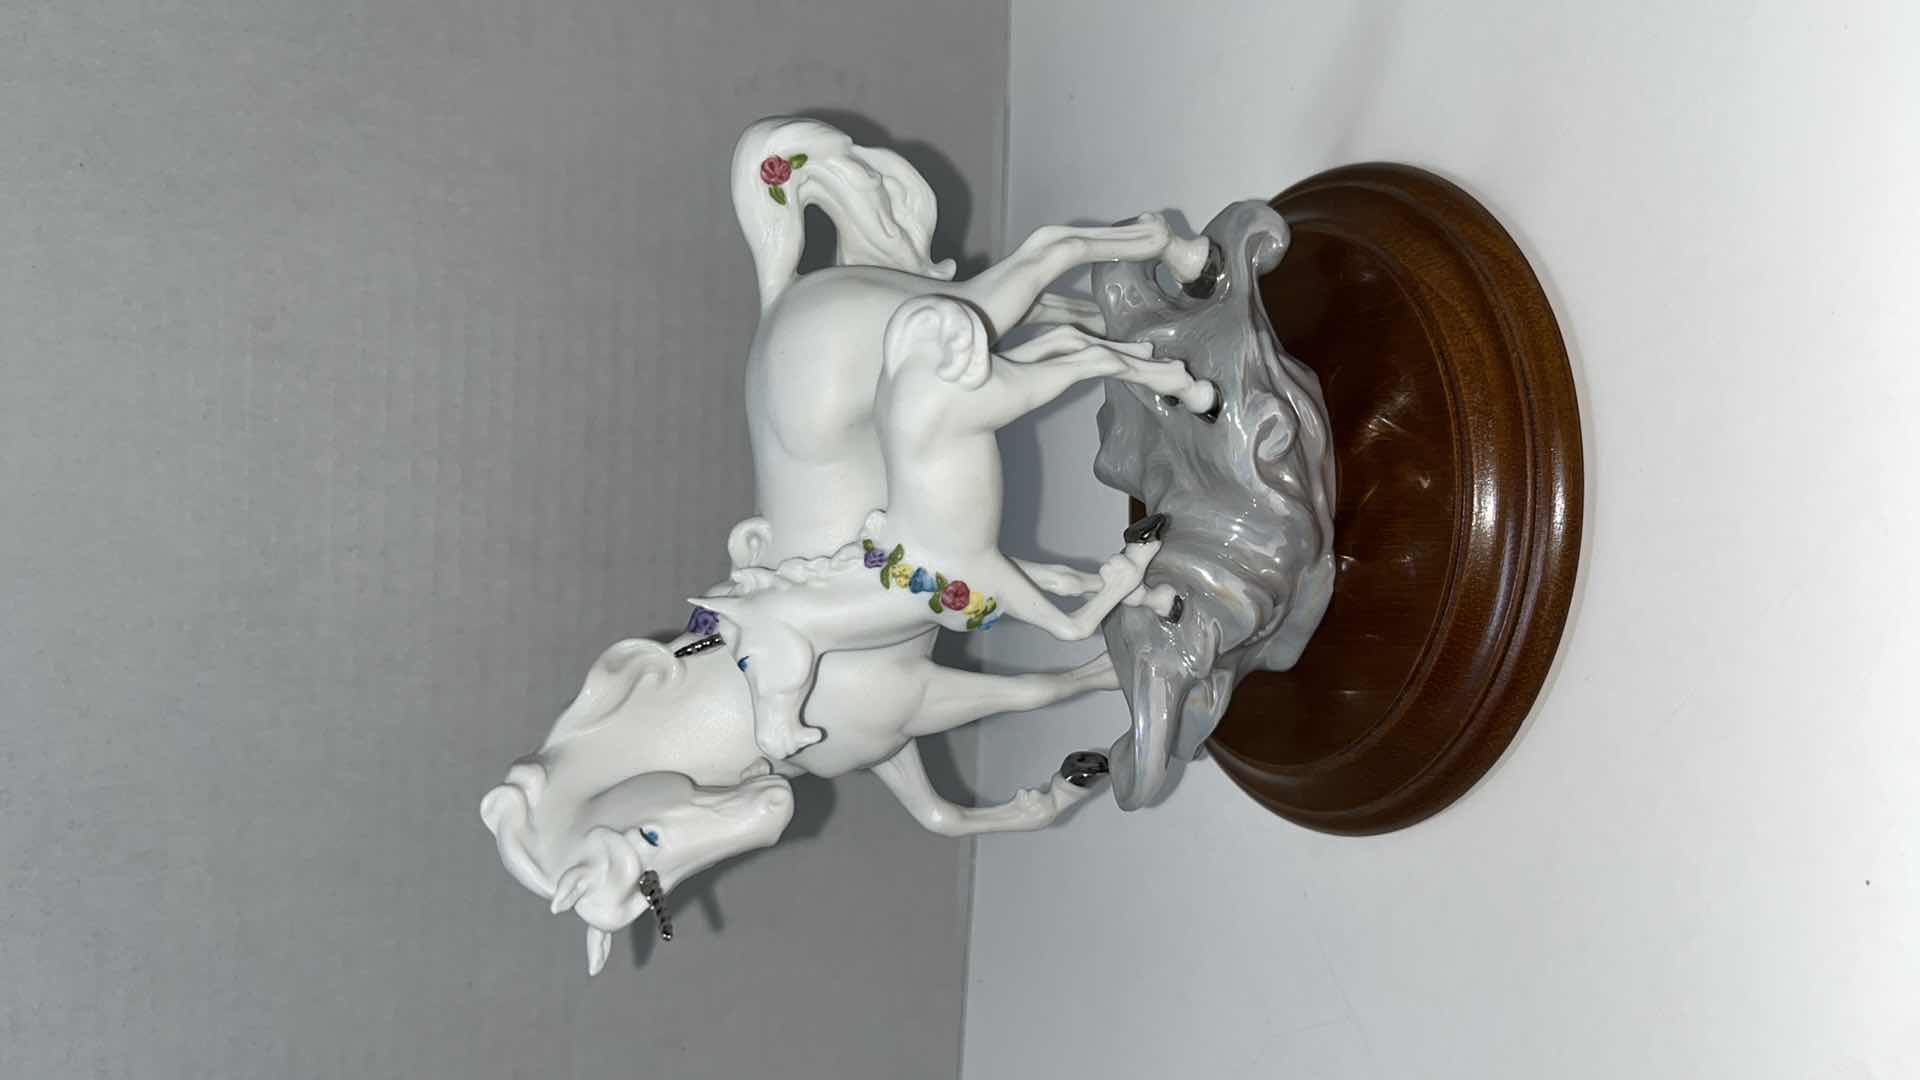 Photo 1 of VINTAGE HALLMARK MAGICAL UNICORN COLLECTION “LOVES REFLECTION” SCULPTED BY DUANE UNRUH, 1988